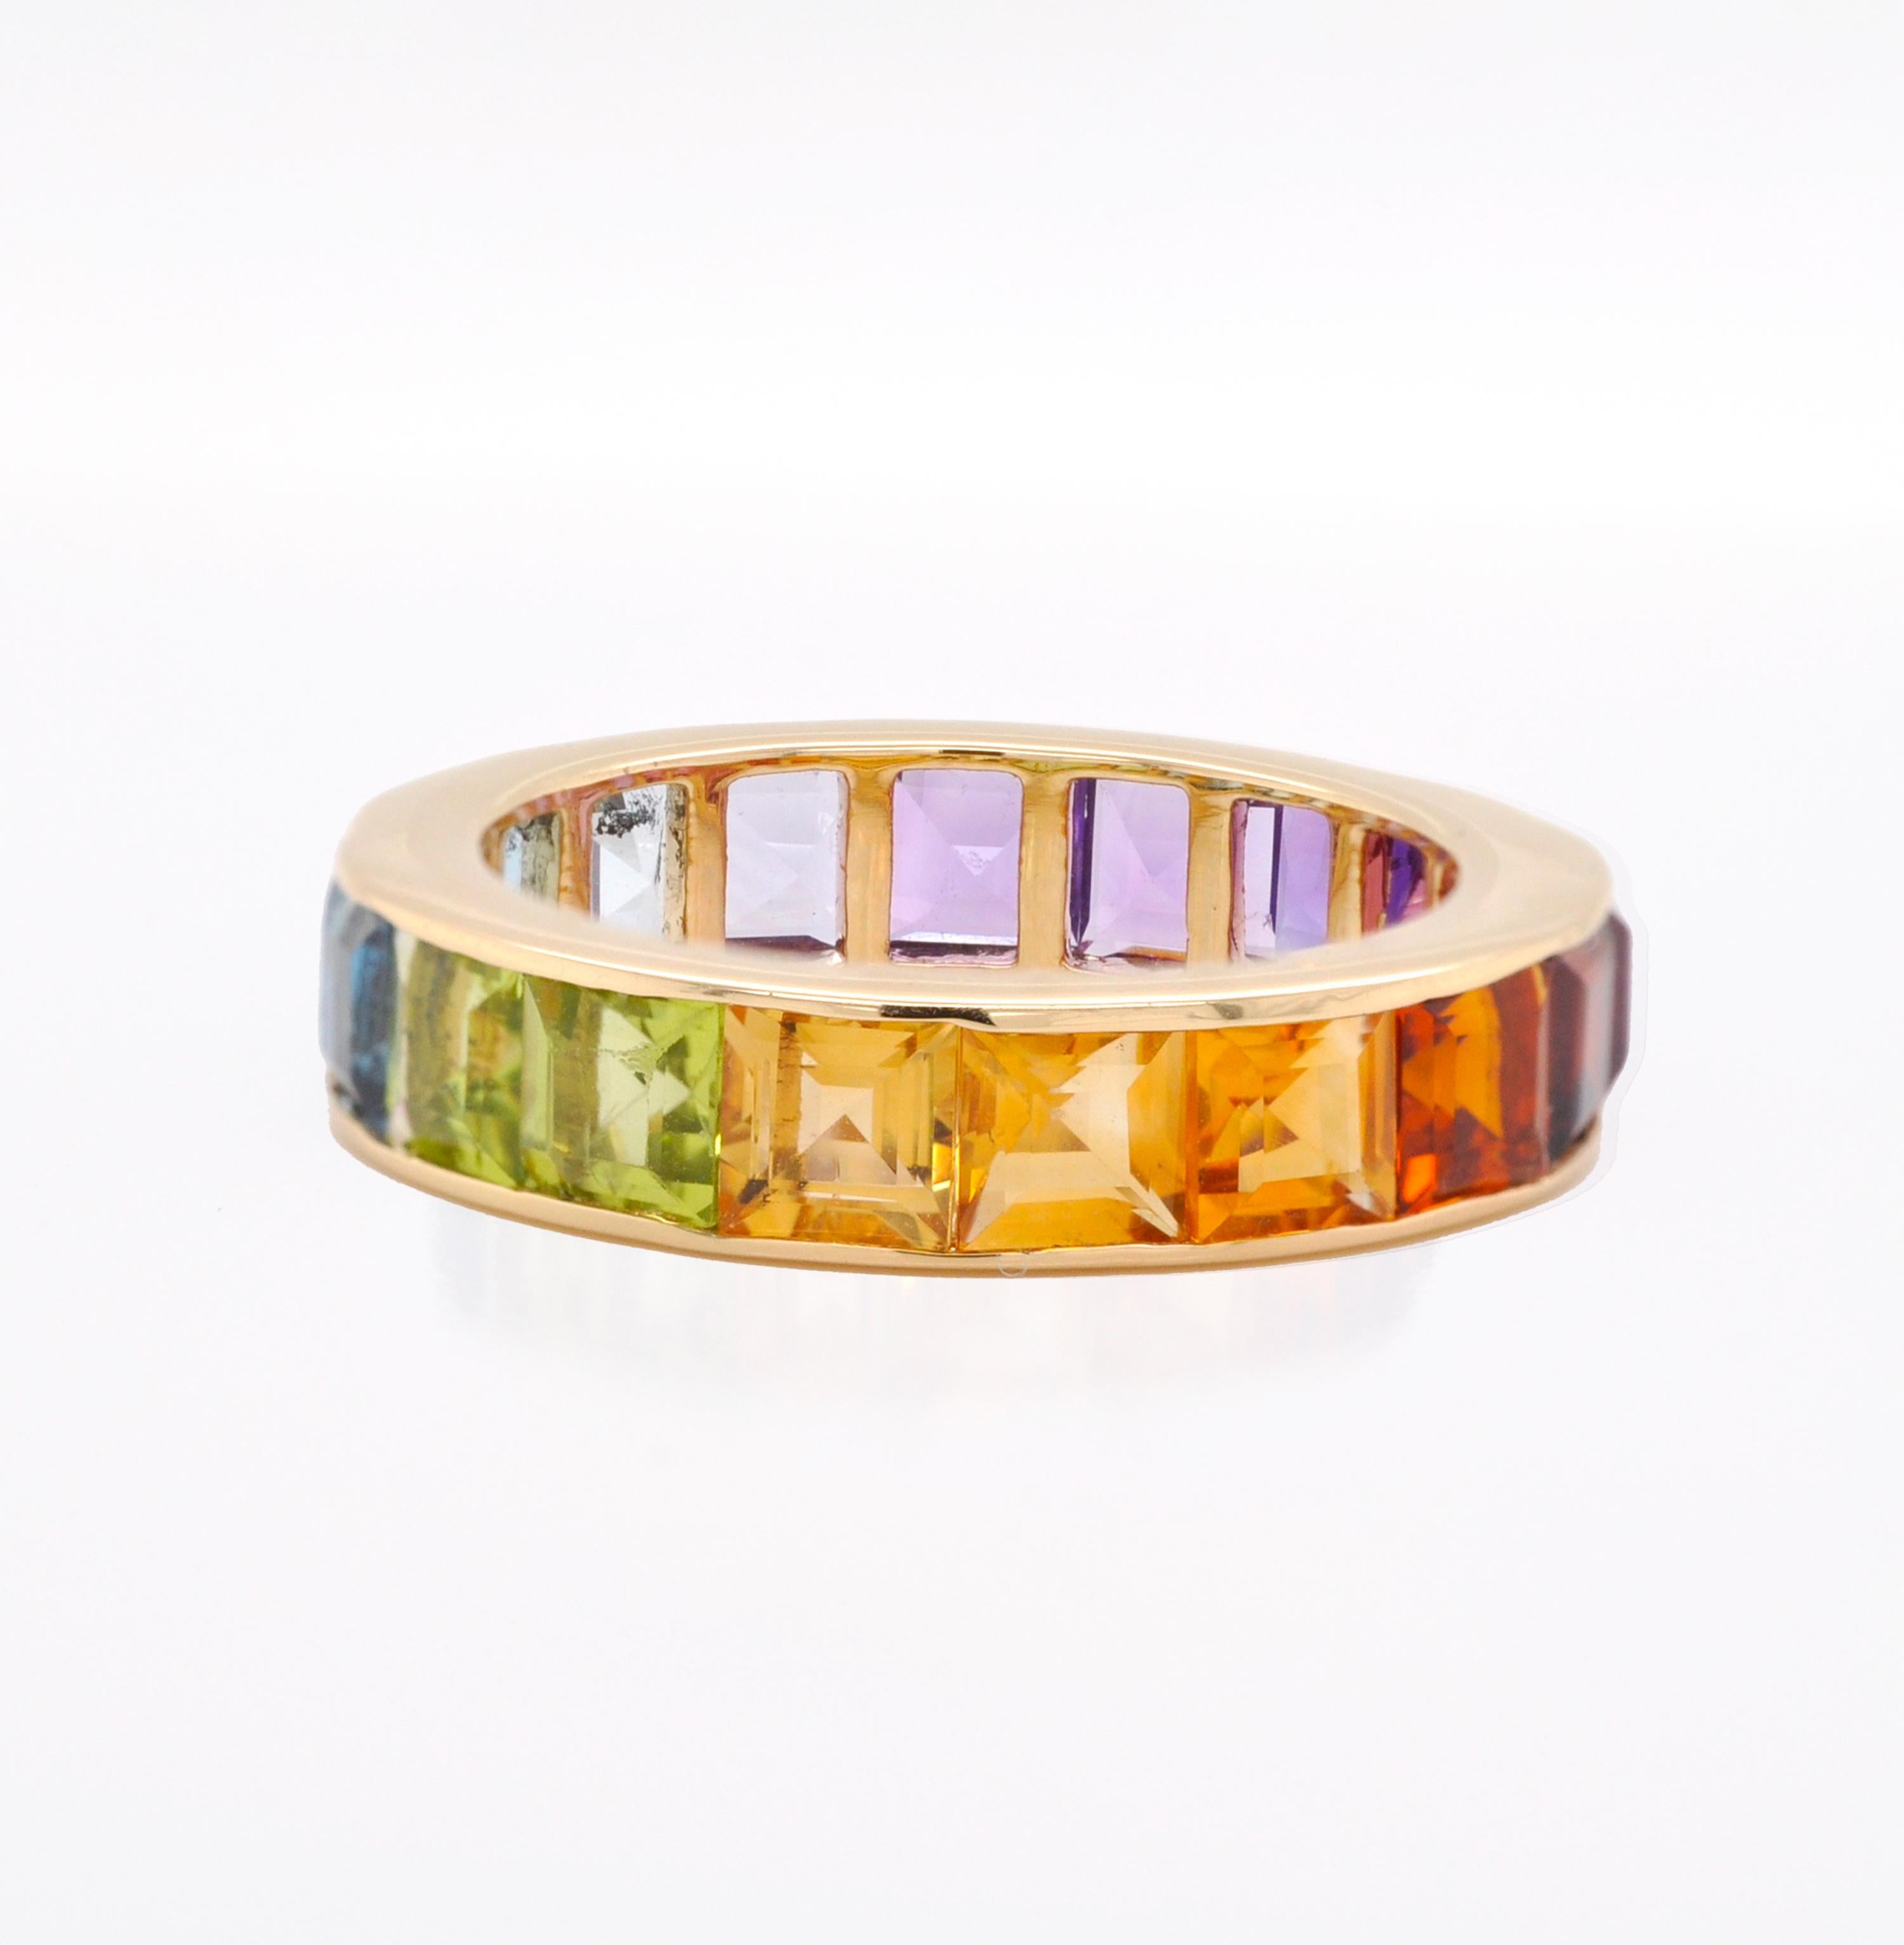 For Sale:  18K Gold Channel-Set 4 MM Square Rainbow Gemstones Eternity Band Ring 7